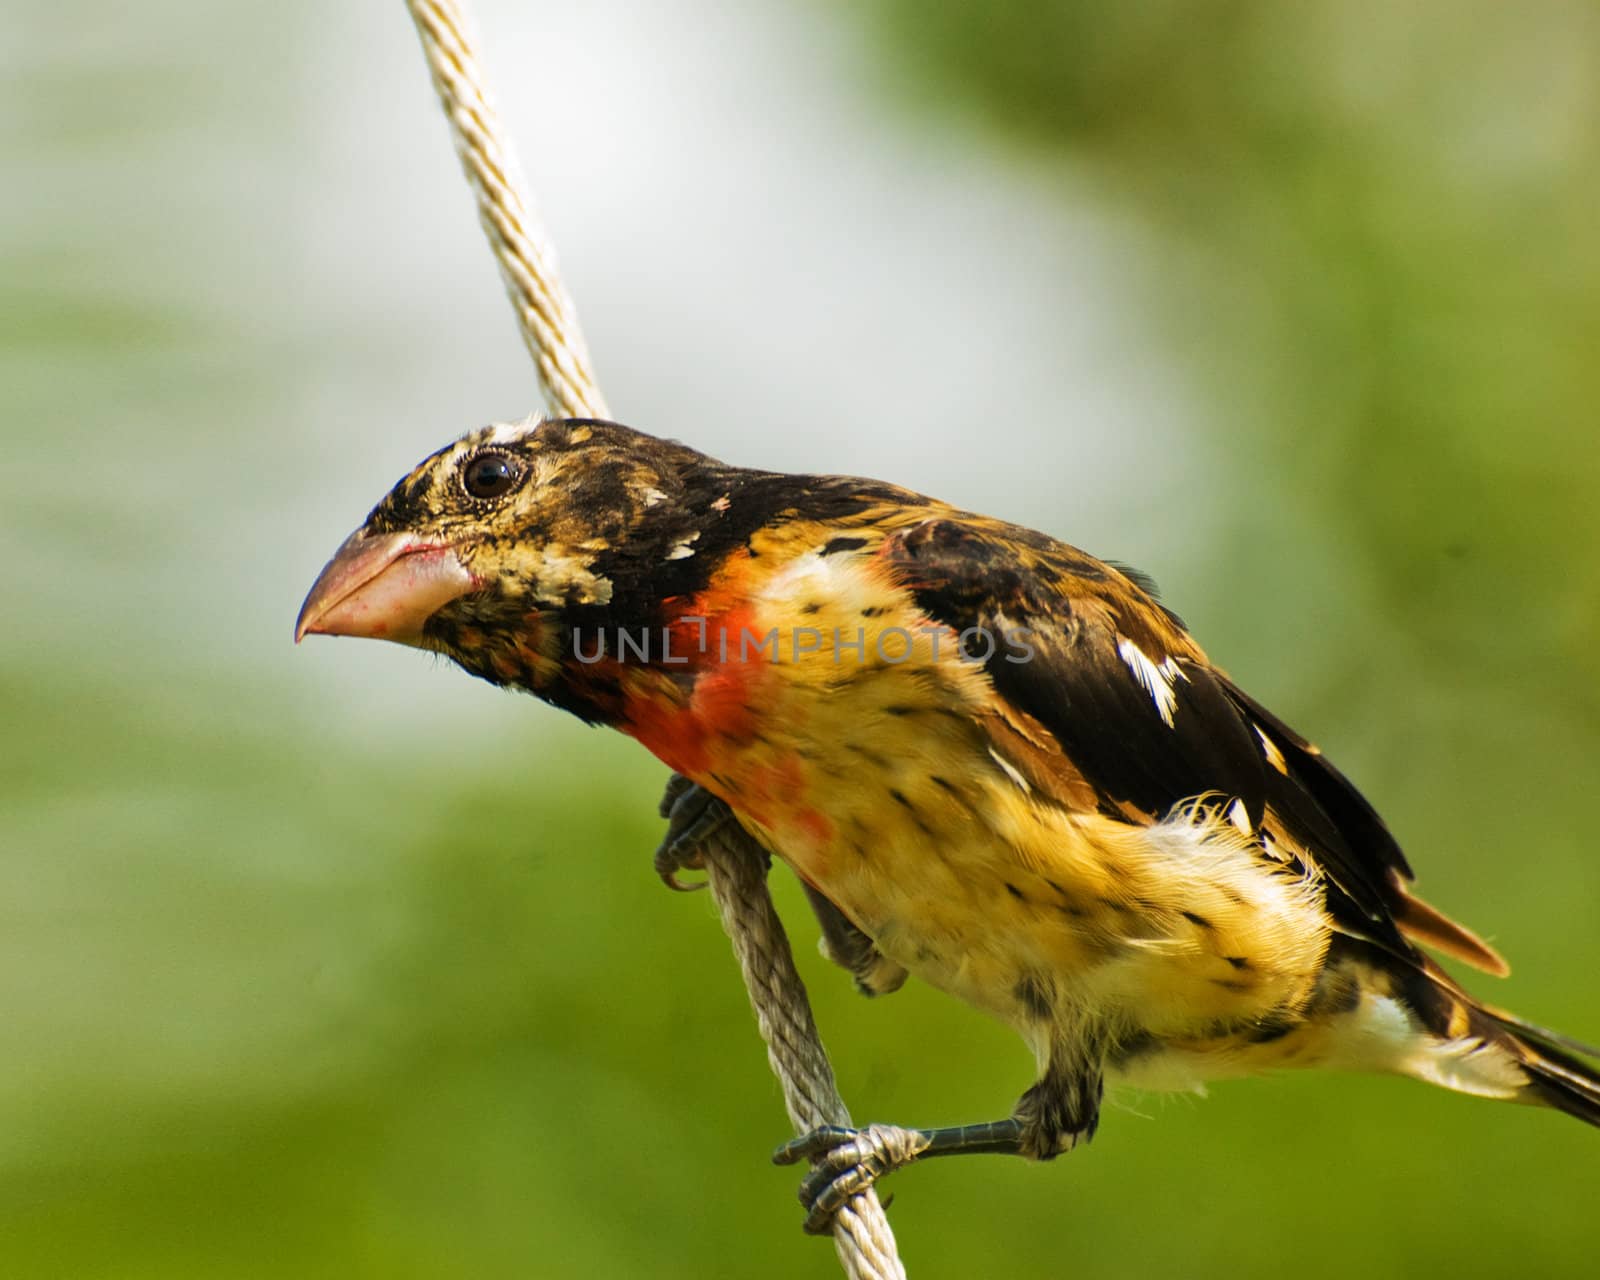 A black winged bird with a yellow chest eating out of a bridfeeder.